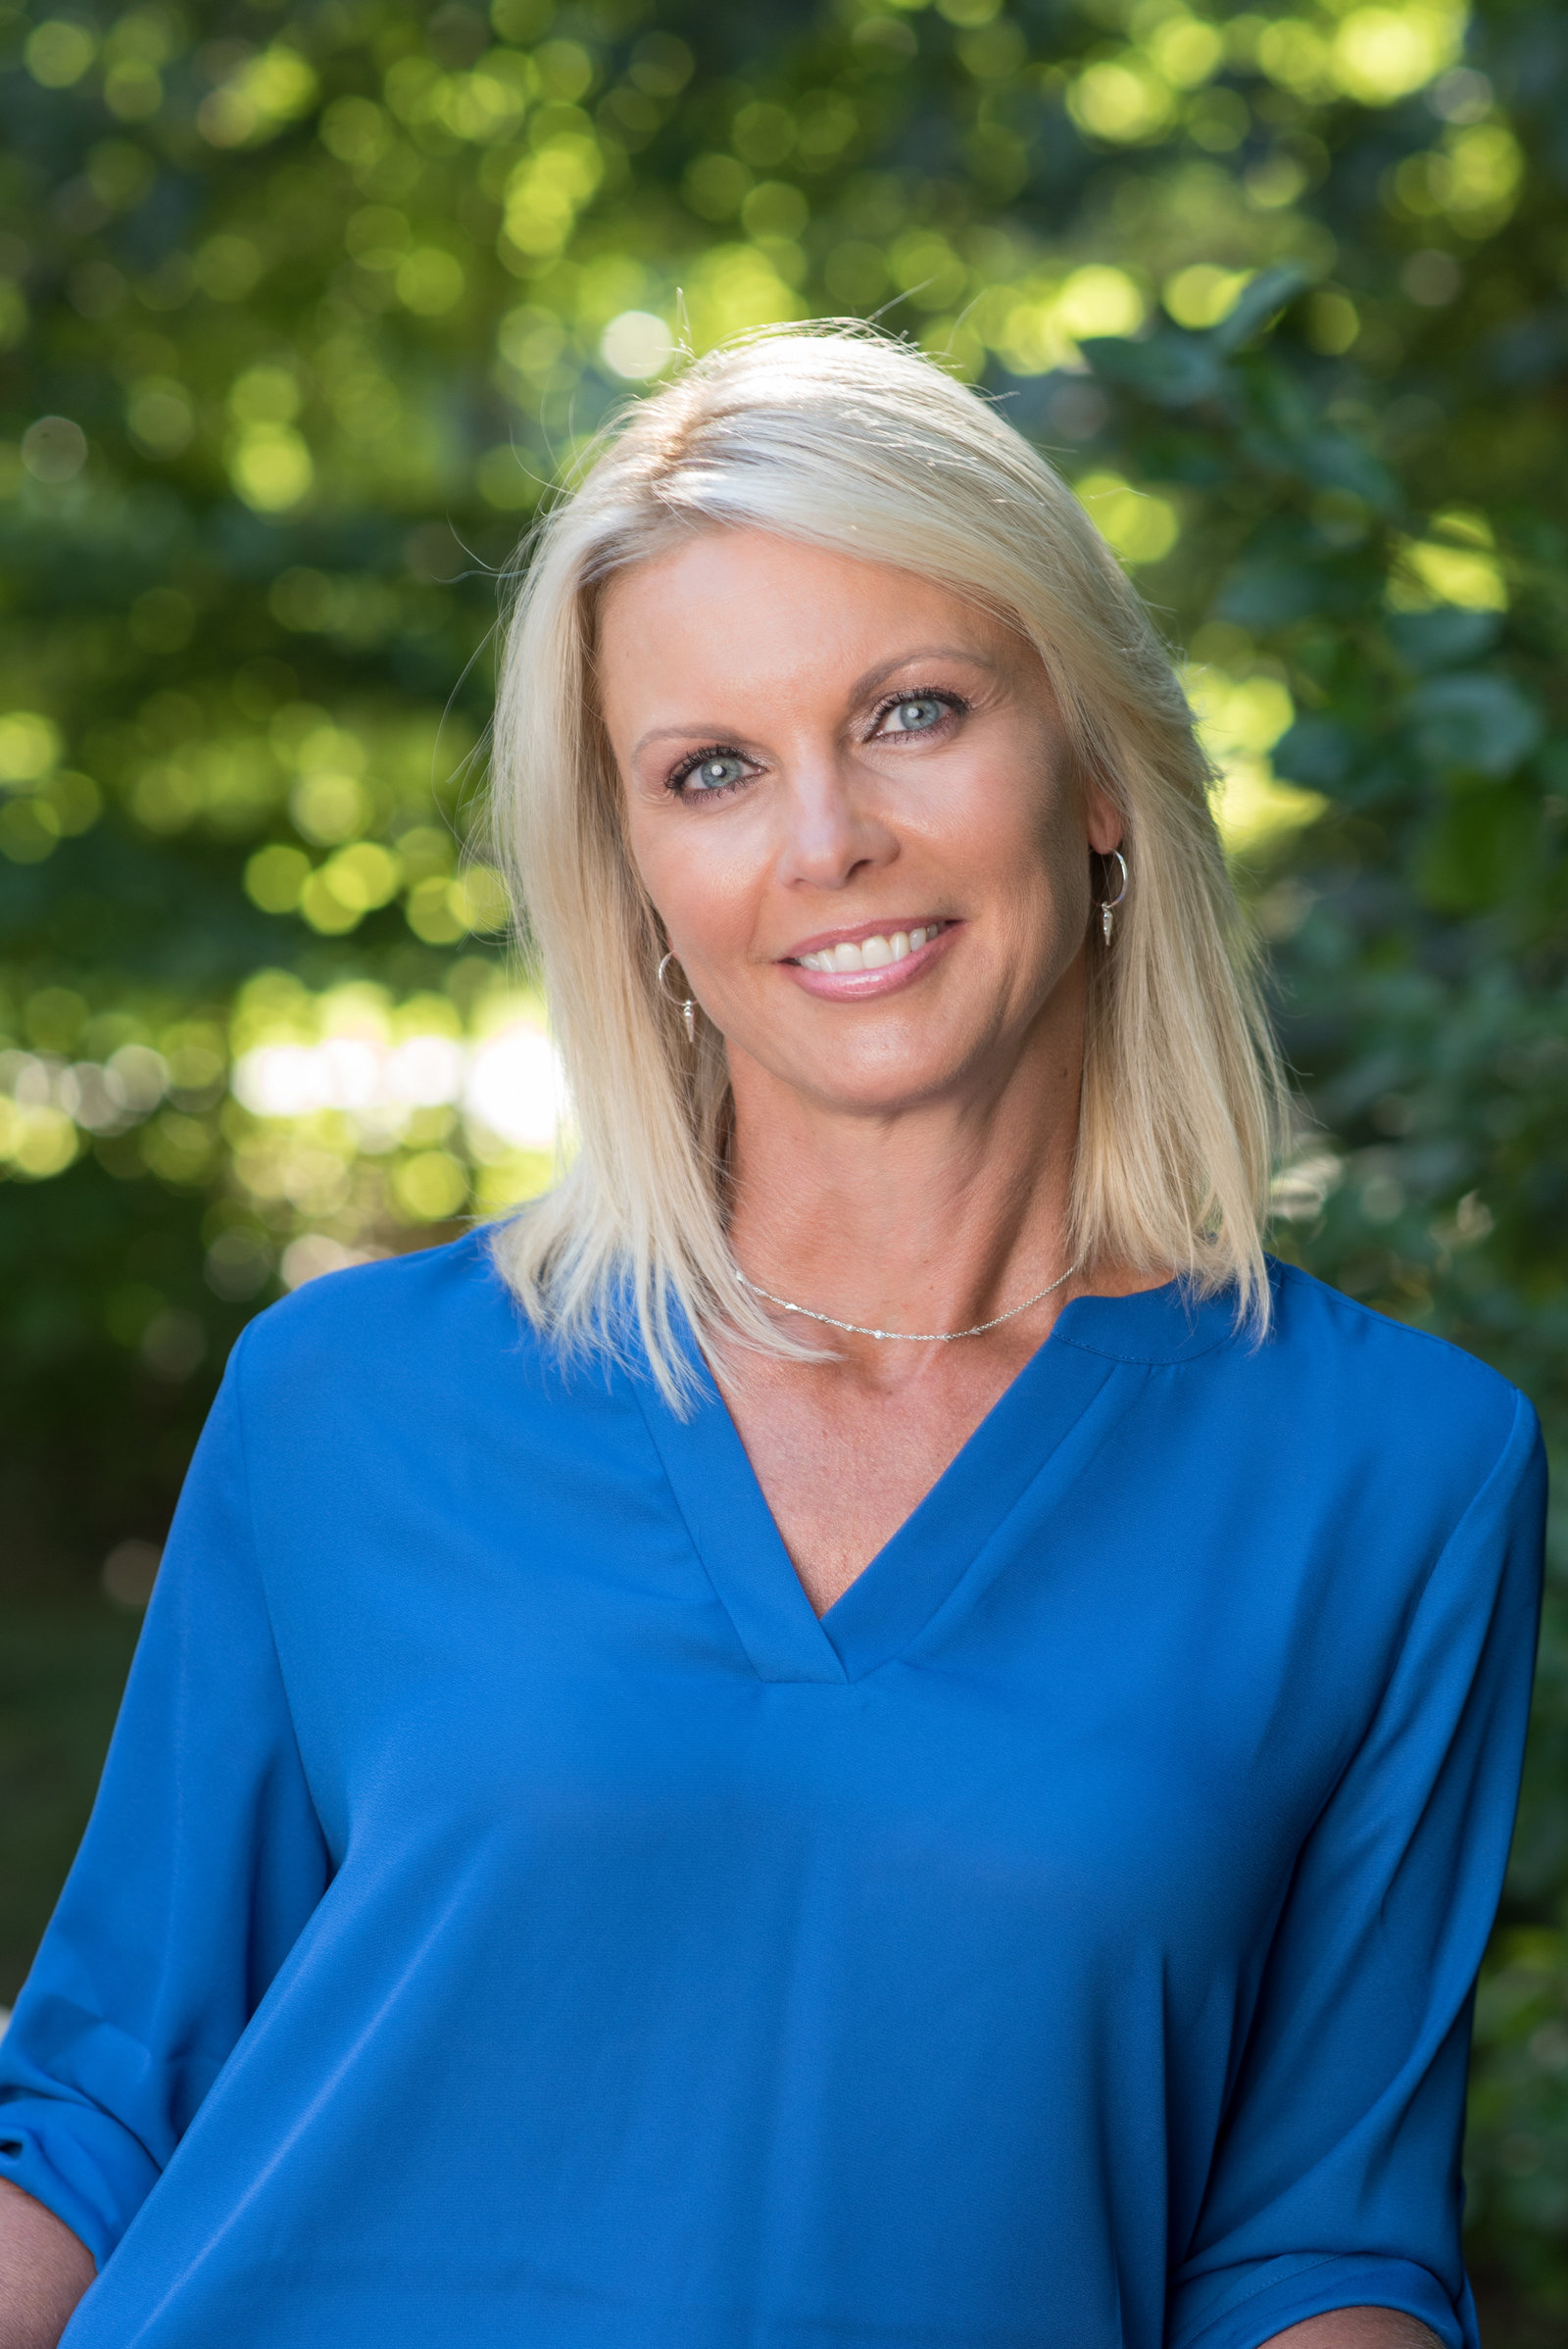 Corporate Headshot, West Chester PA Photographer, Headshot photographer, Dottie Foley Photography